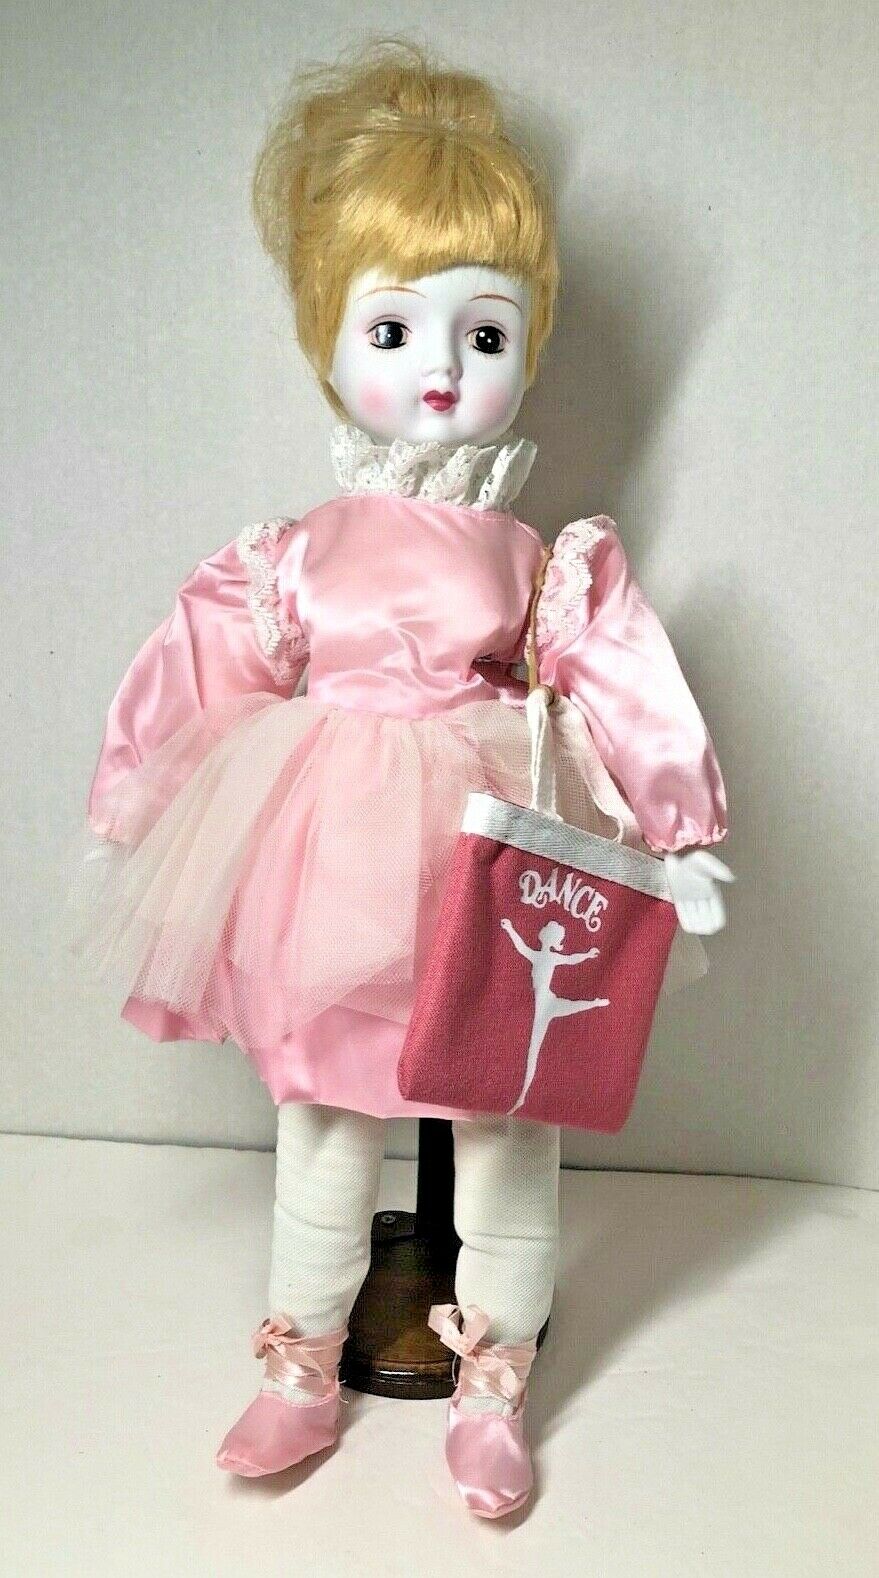 Euc Vntg. 1980s Collectible Doll From Msr Imports - 17" Ballerina W/ Toe Shoes